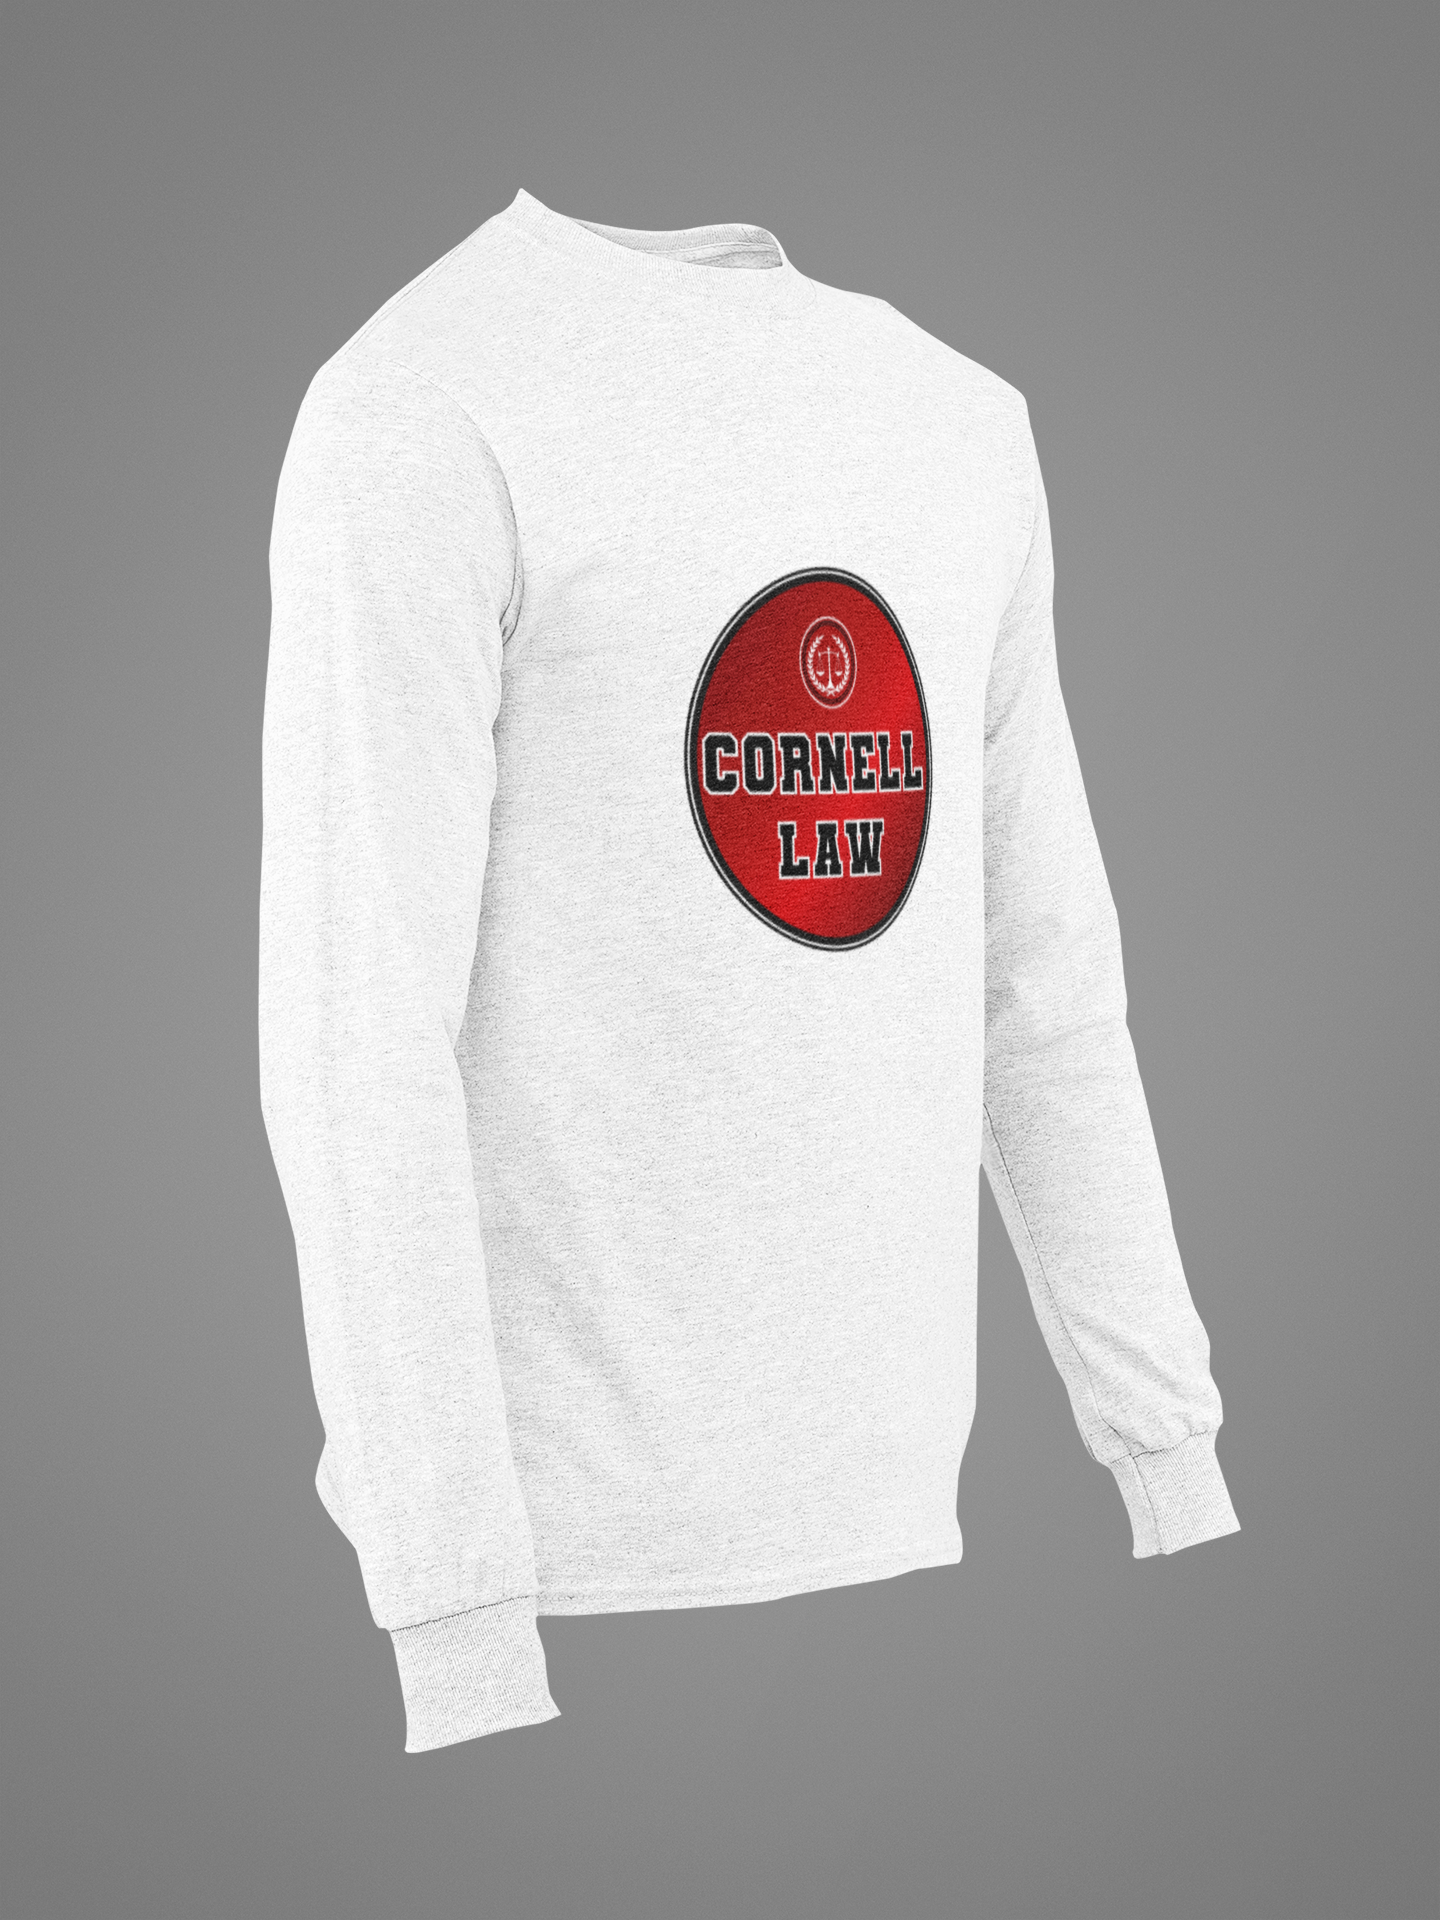 Red Circle Emblem, Cornell Law Long Sleeve T-shirt With Law School Scales of Justice Emblem in Red